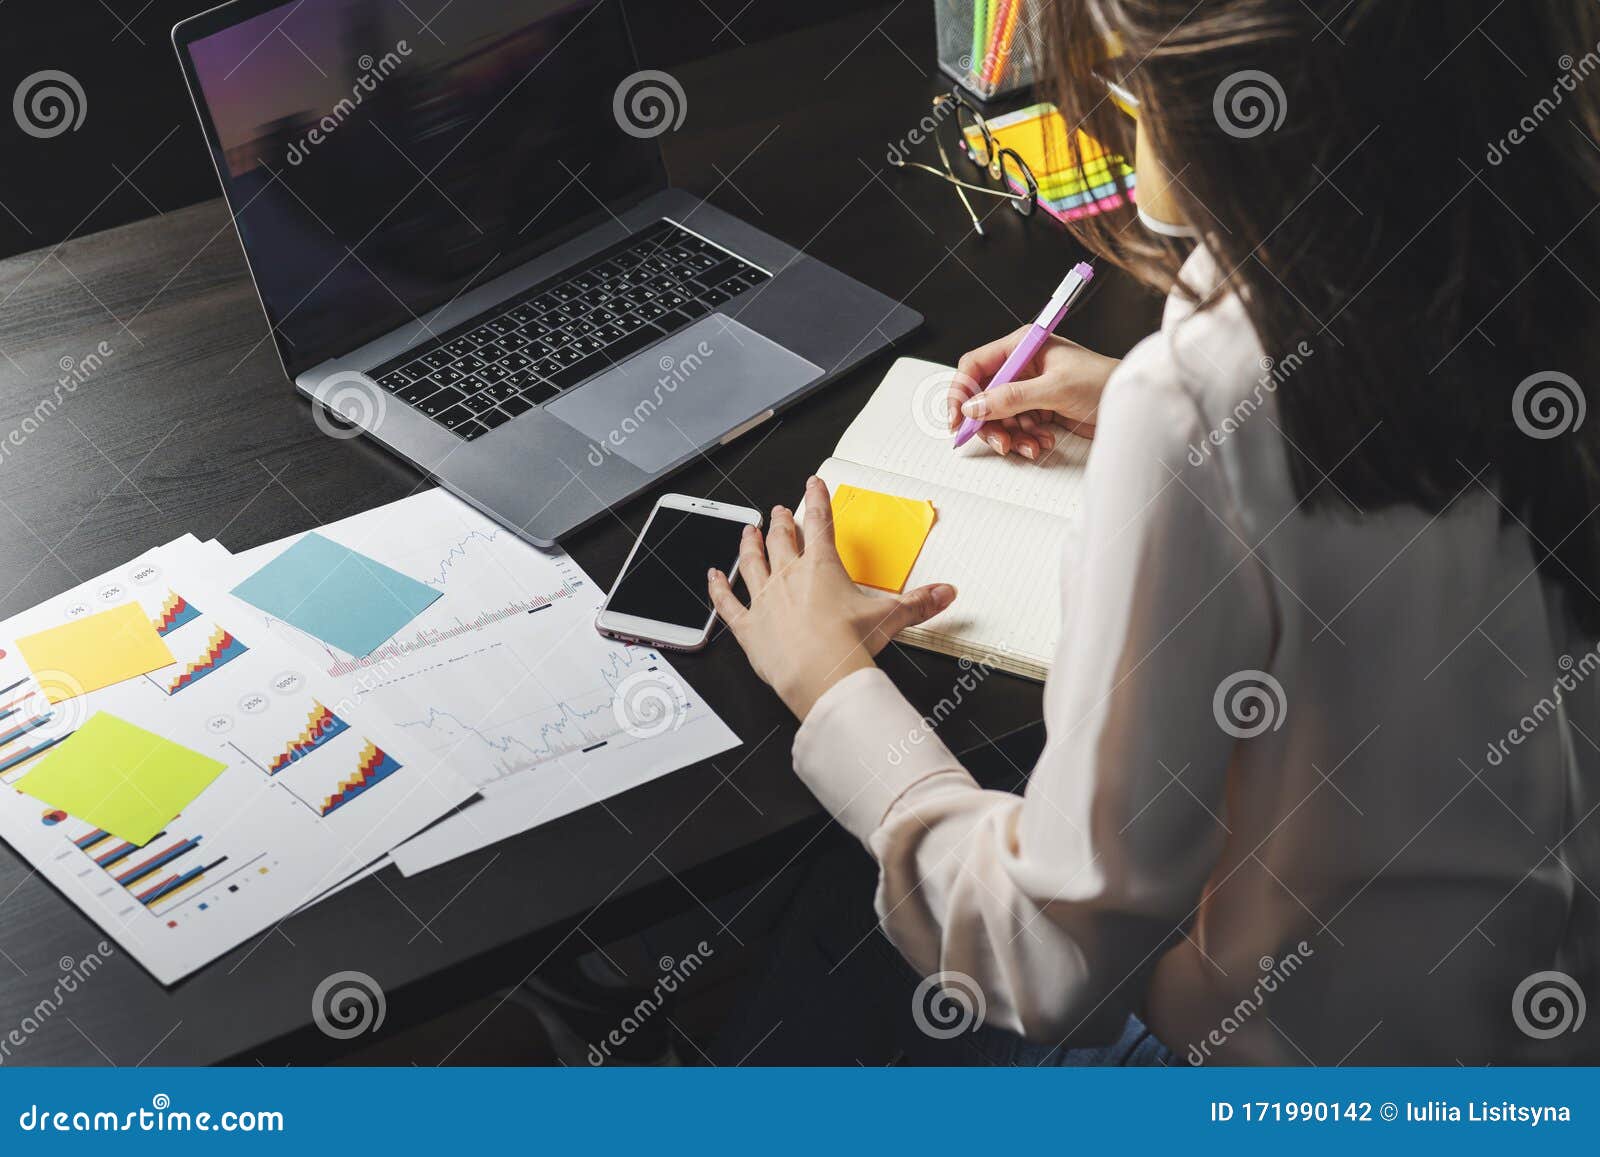 Woman Working On Laptop Manager Sitting At Office Desk And